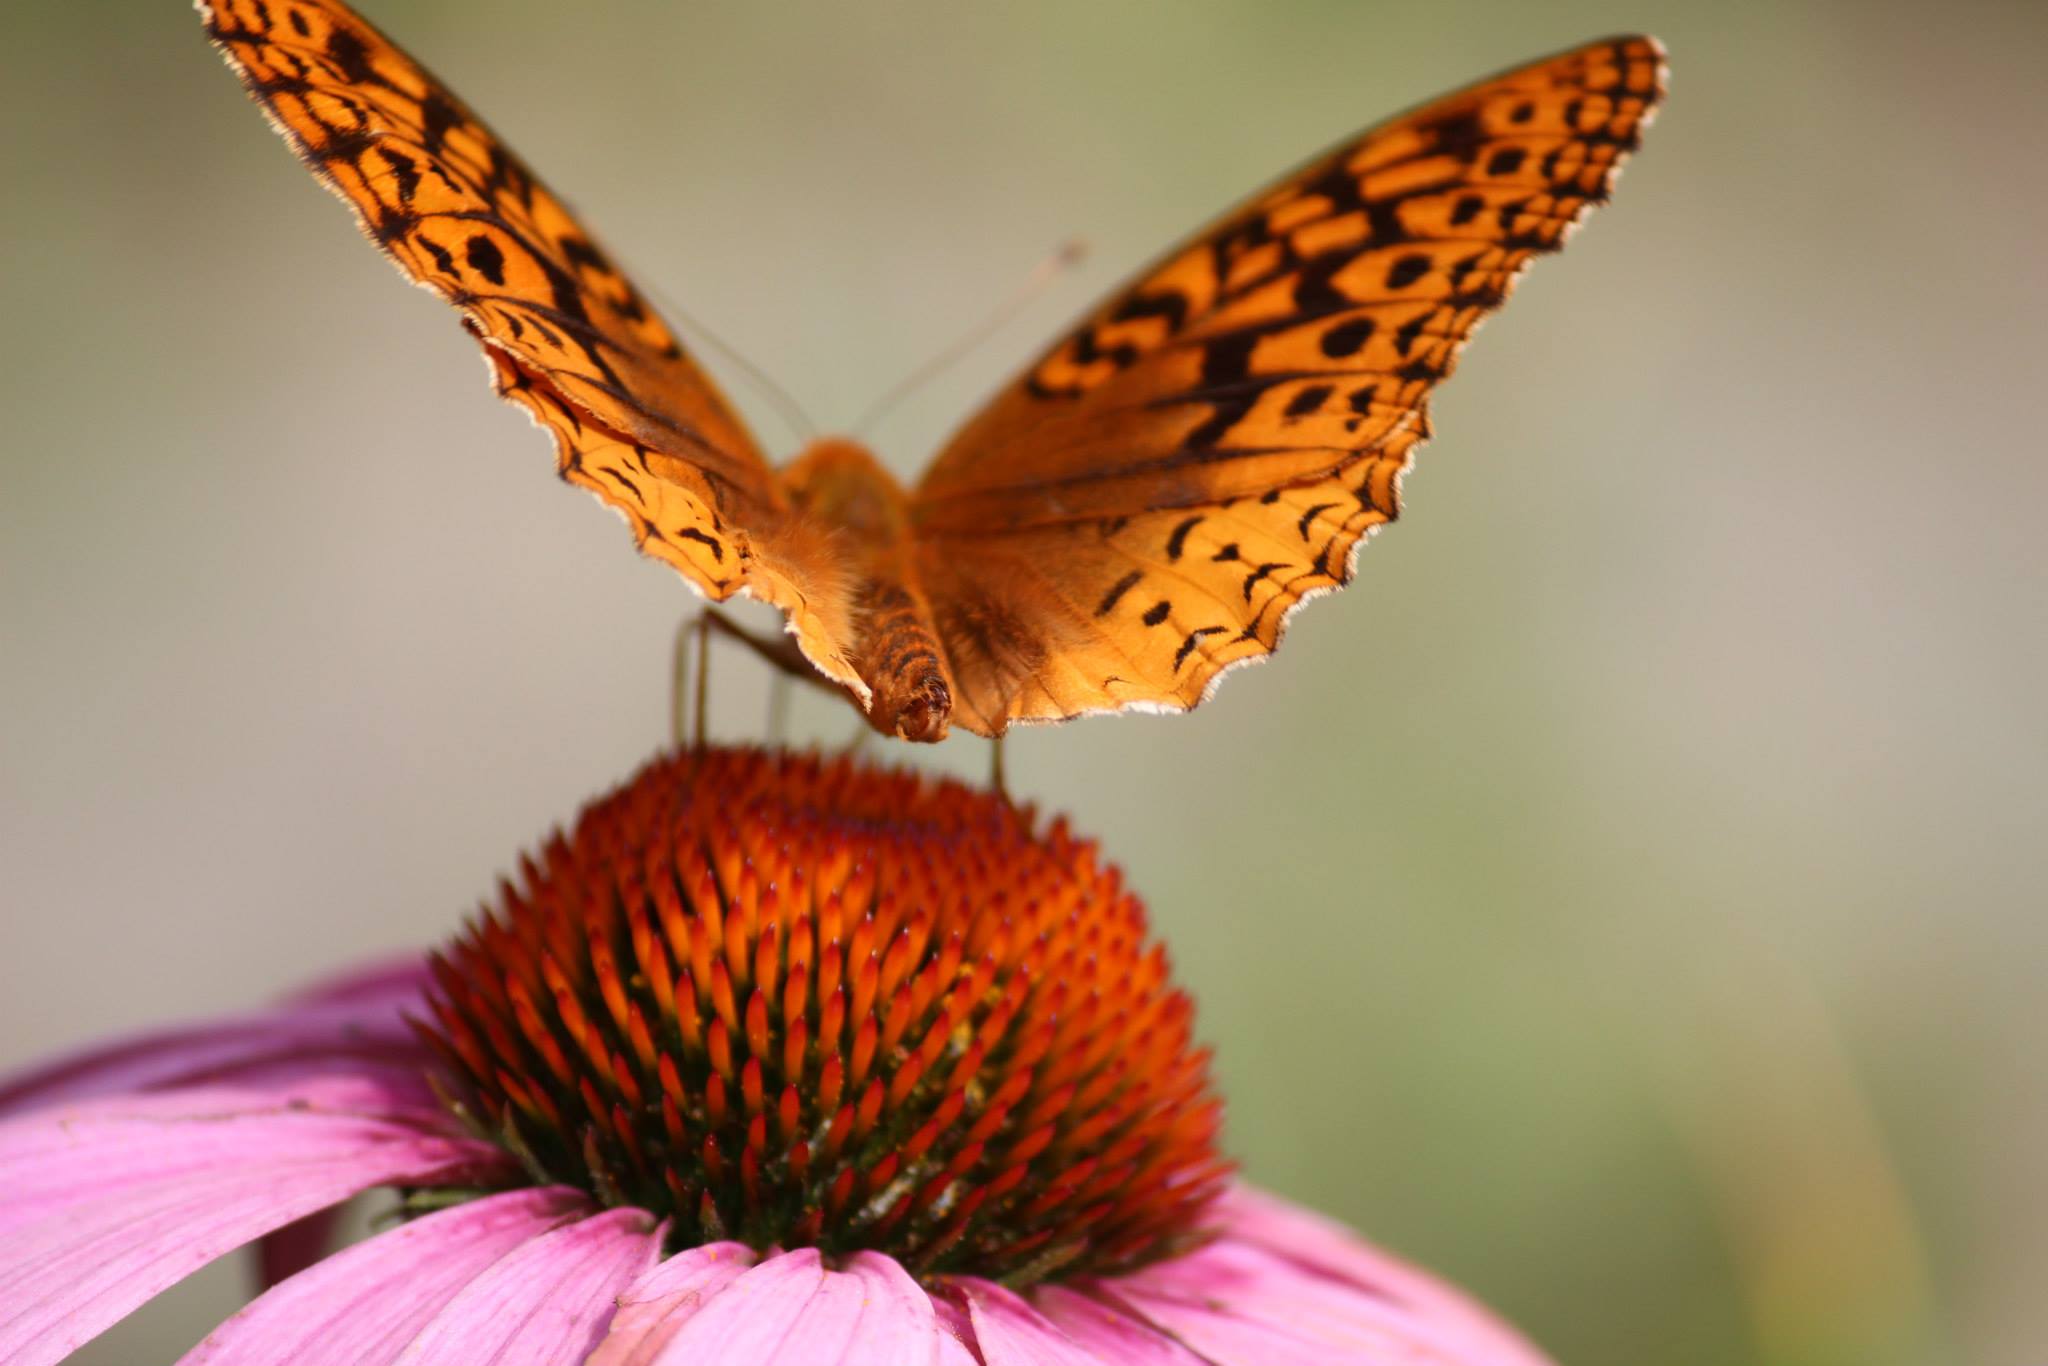 Native plants like this purple coneflower are necessary for the survival of native butterflies, like this great spangled fritillary. Plant native plants and help ensure the survival of native butterflies.